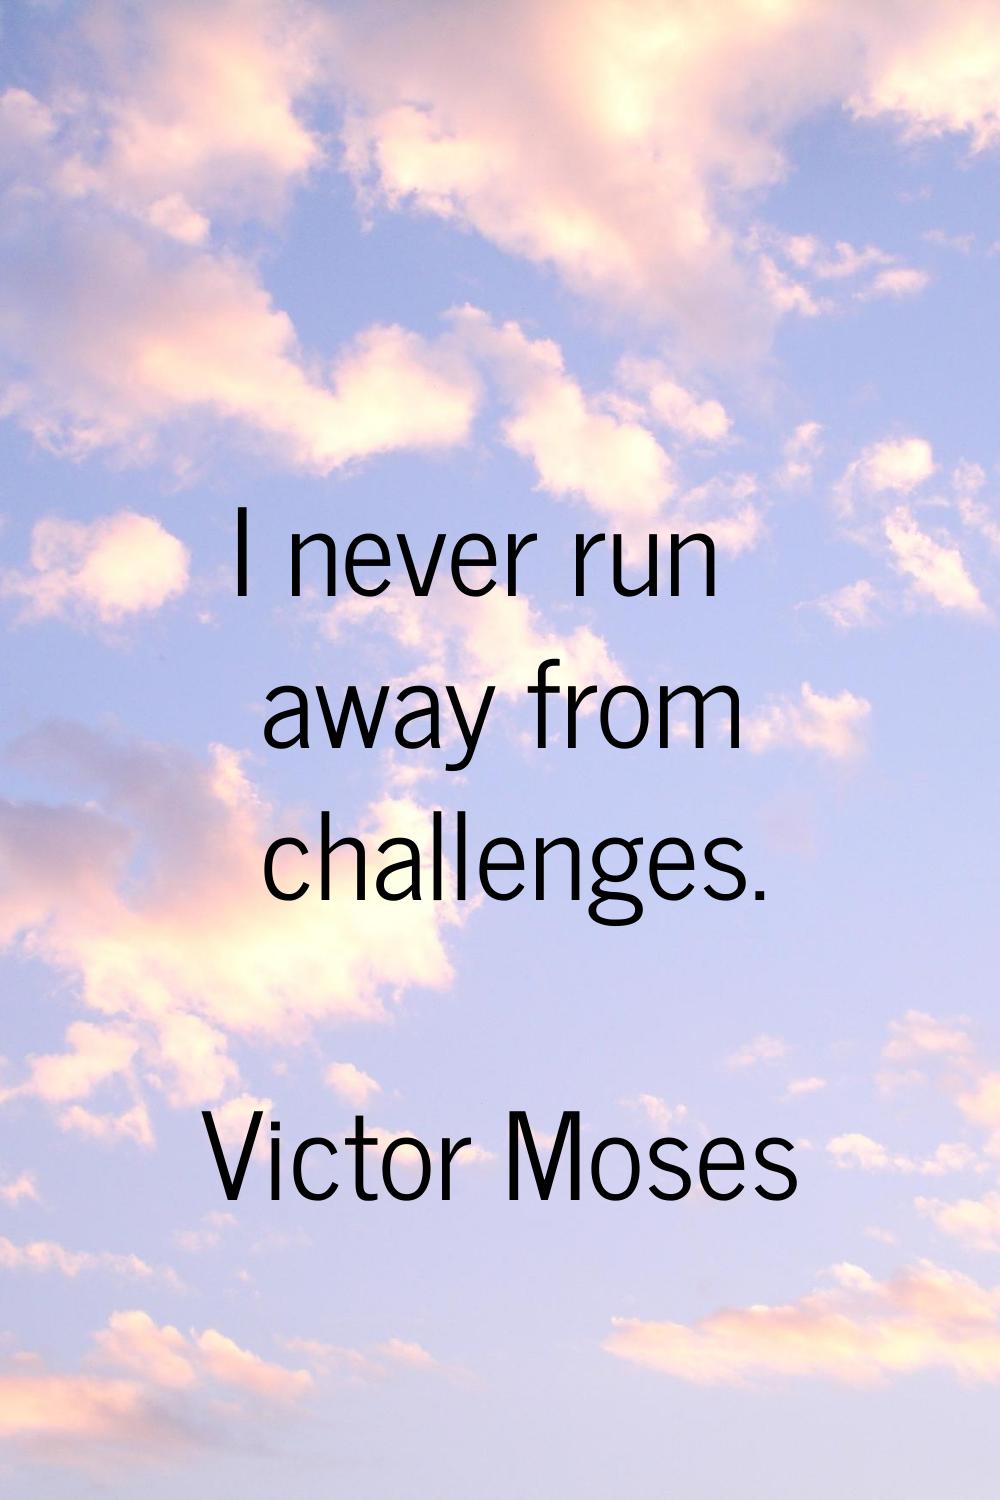 I never run away from challenges.